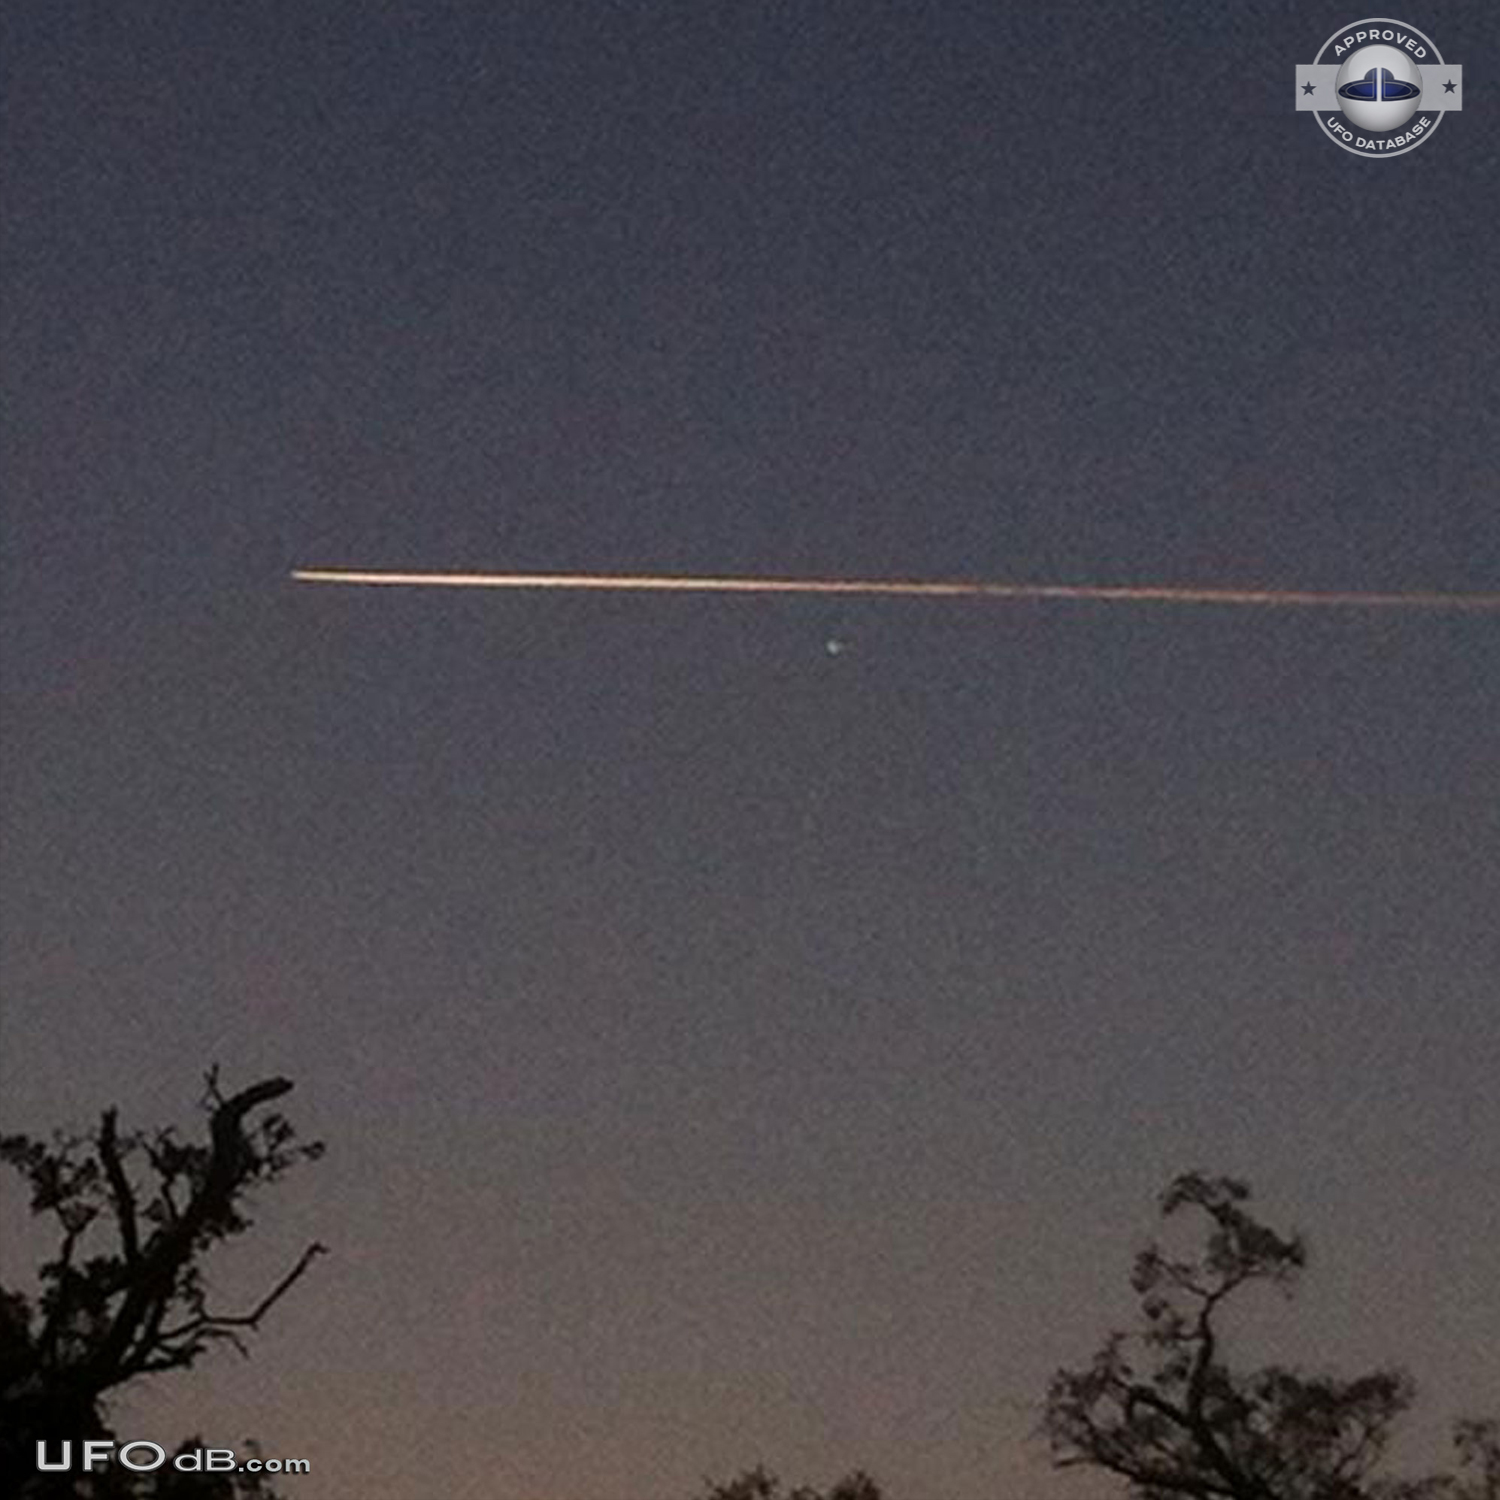 Photos of vaportrail in sunrise get UFO near plane in Evant Texas 2012 UFO Picture #519-1